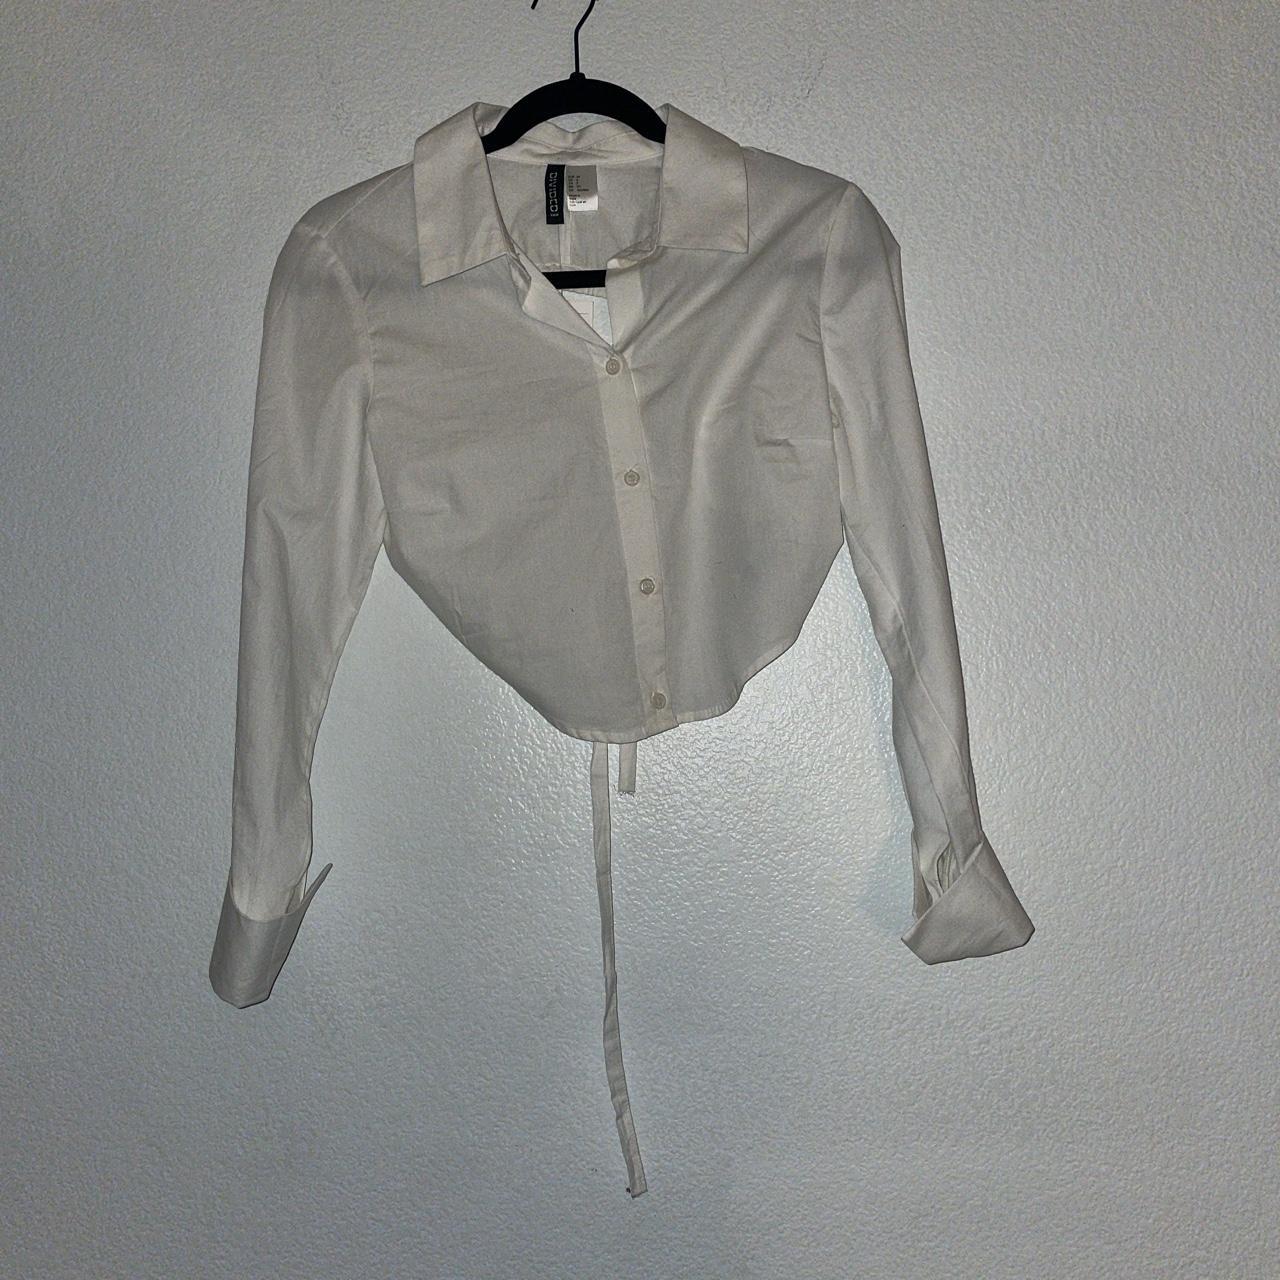 Acne Studios Women's White and Silver Blouse